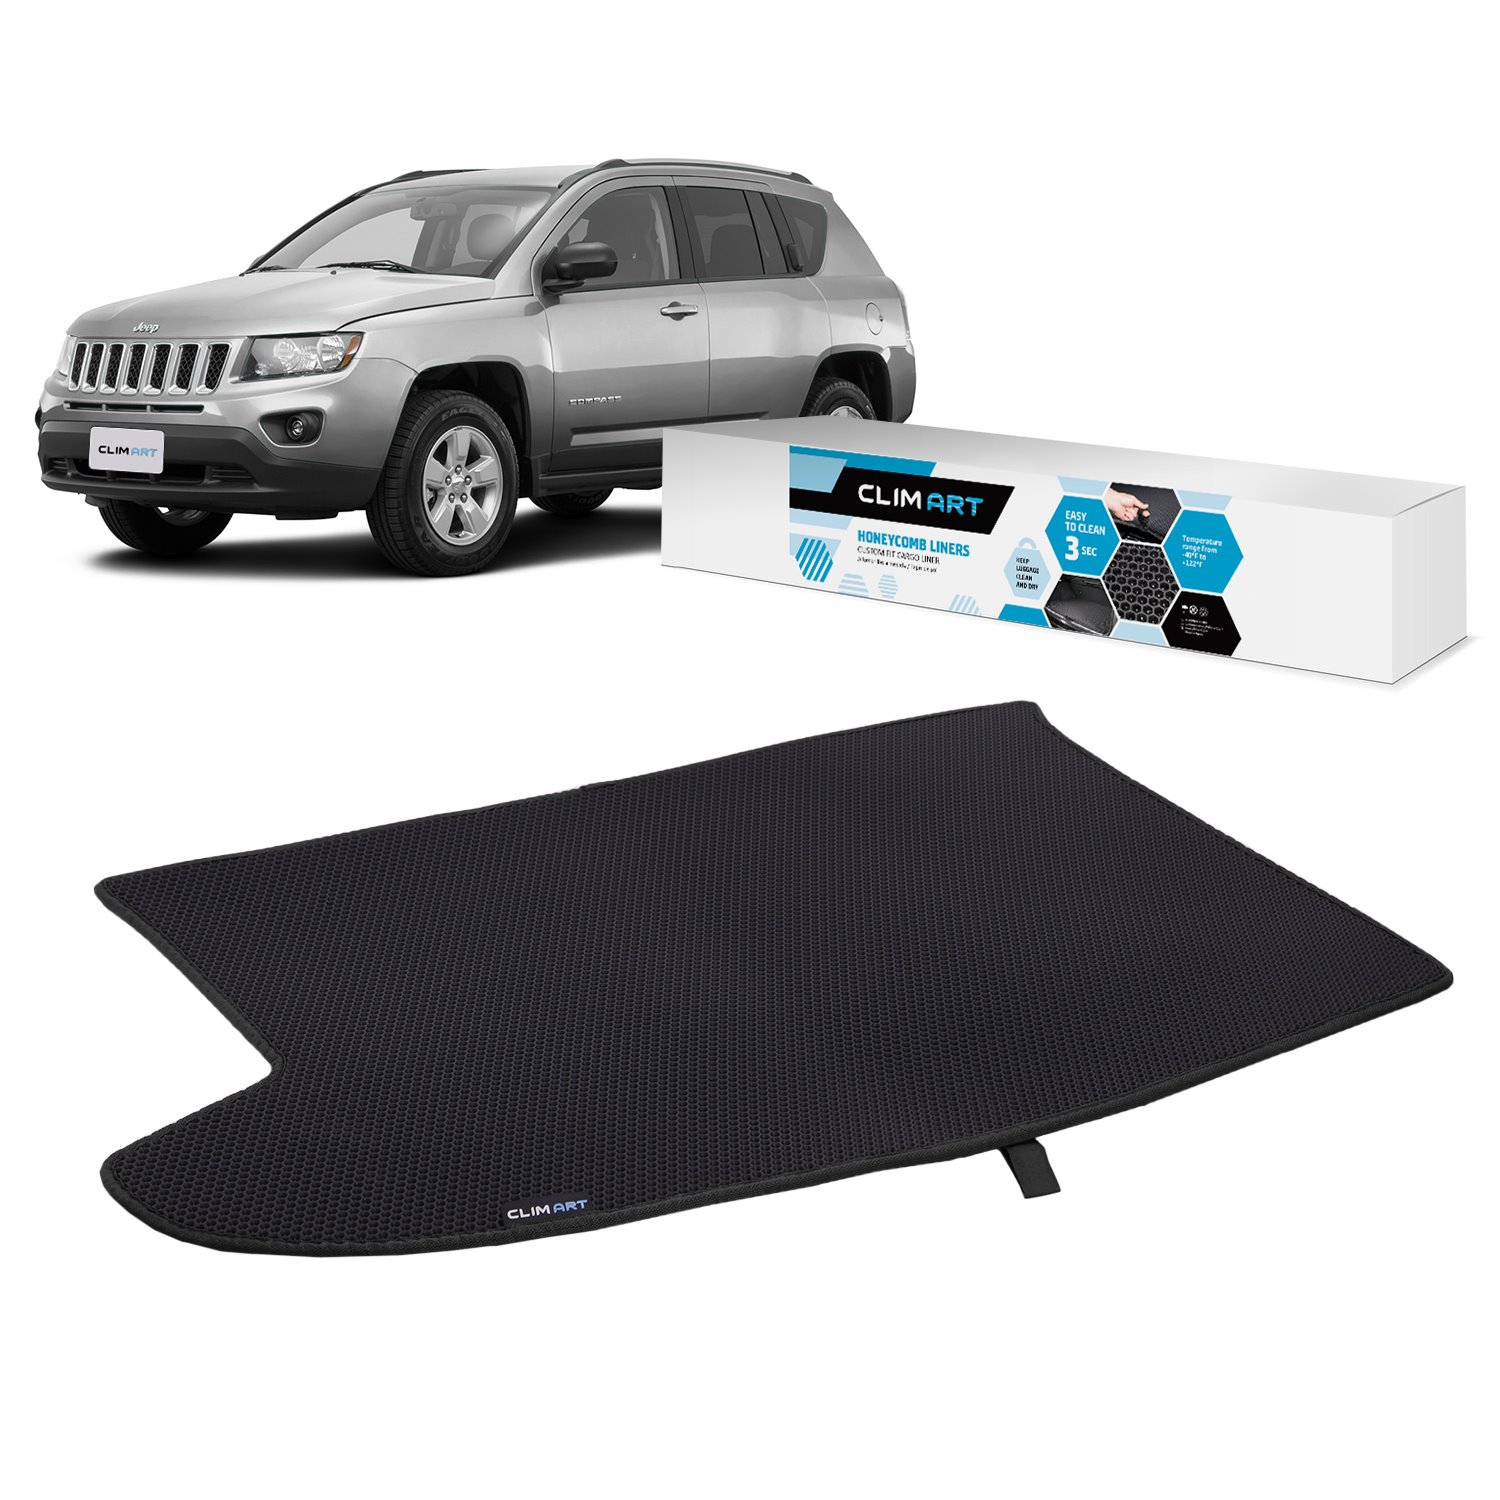 CLIM ART Honeycomb Custom Fit Cargo Liner for 2007-2017 Jeep Compass